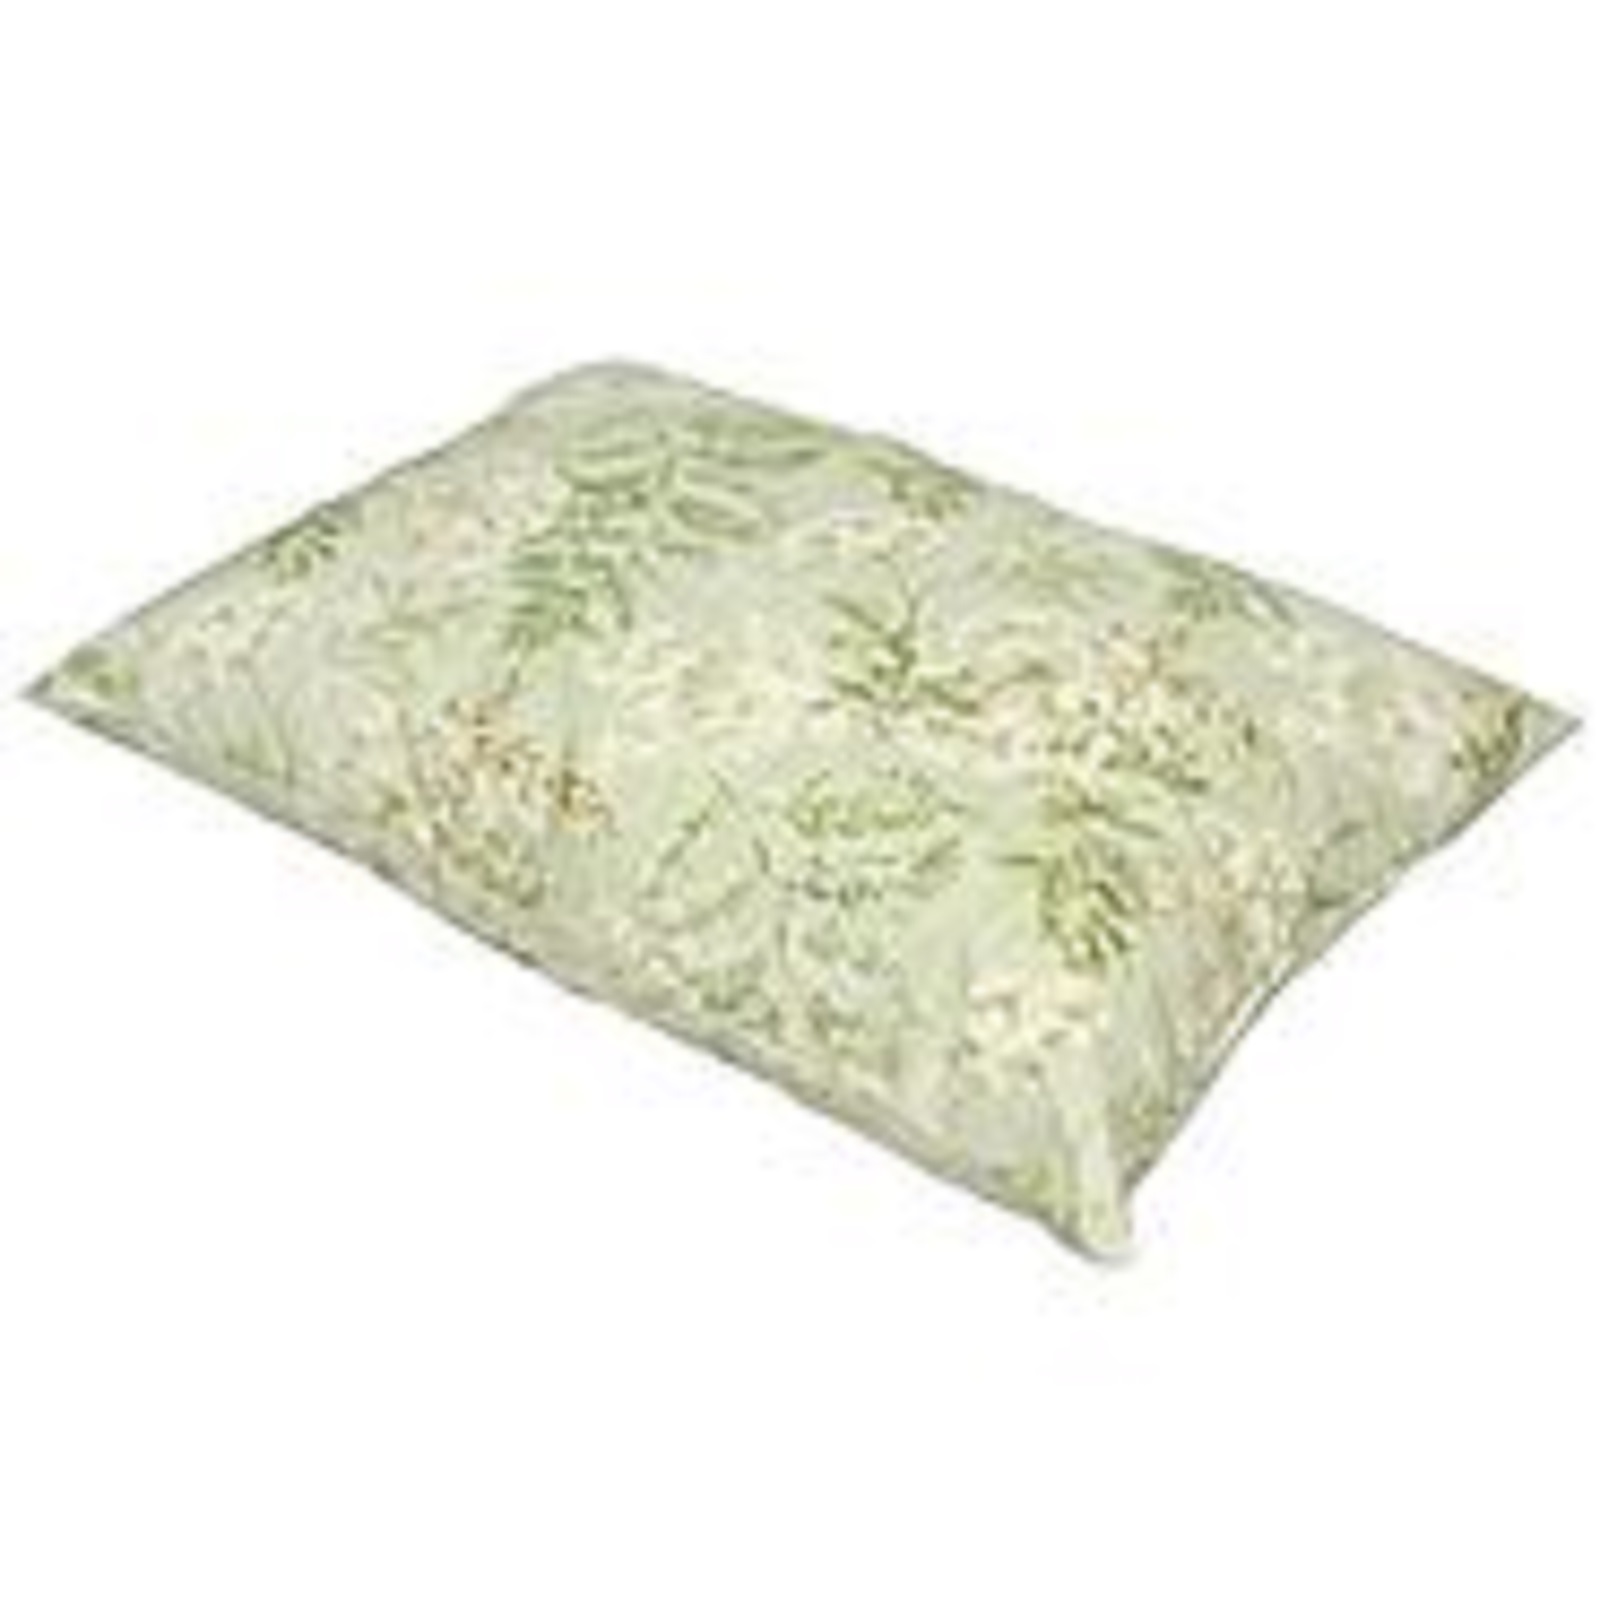 Happy Hounds Bandit Dog Bed - Large (36 x 48") - Aggie floral print